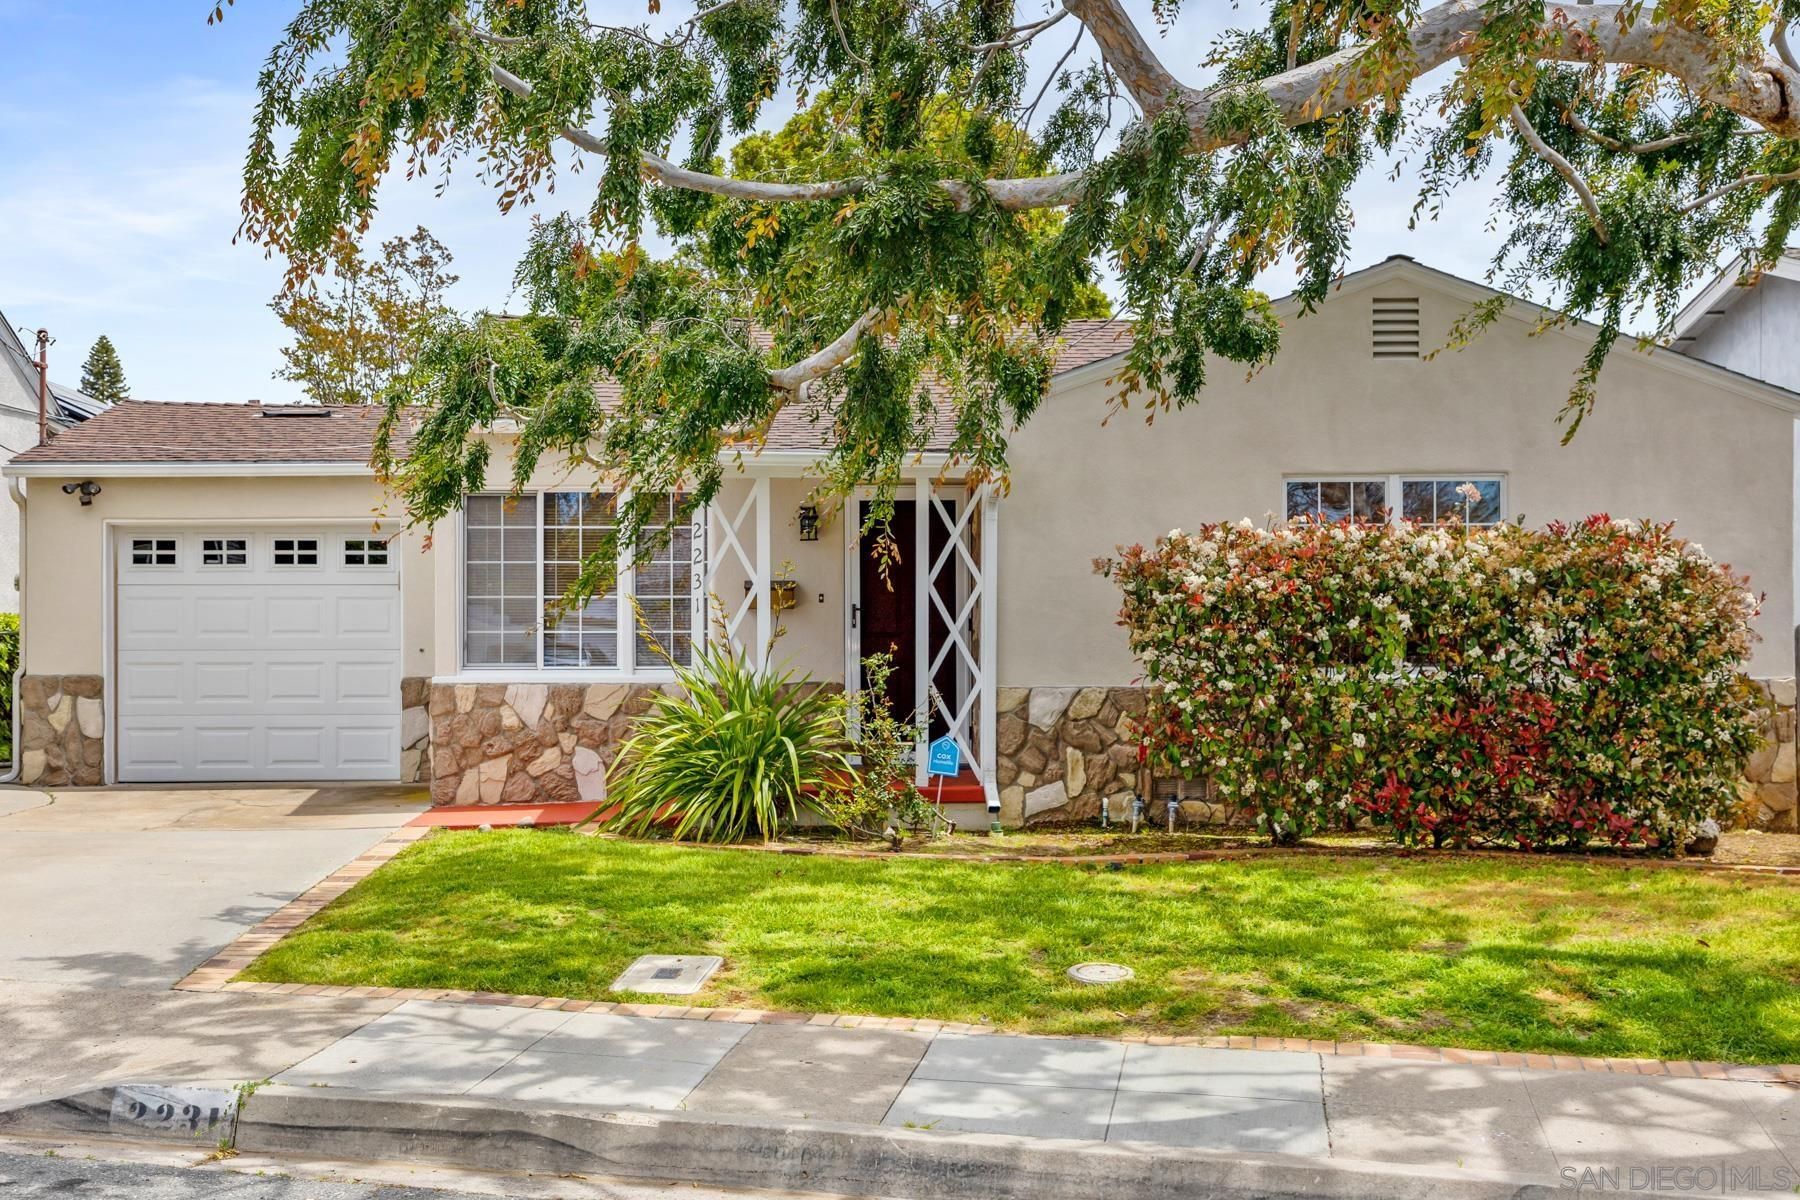 I have sold a property at 2231 WESTLAND AVE in San Diego
